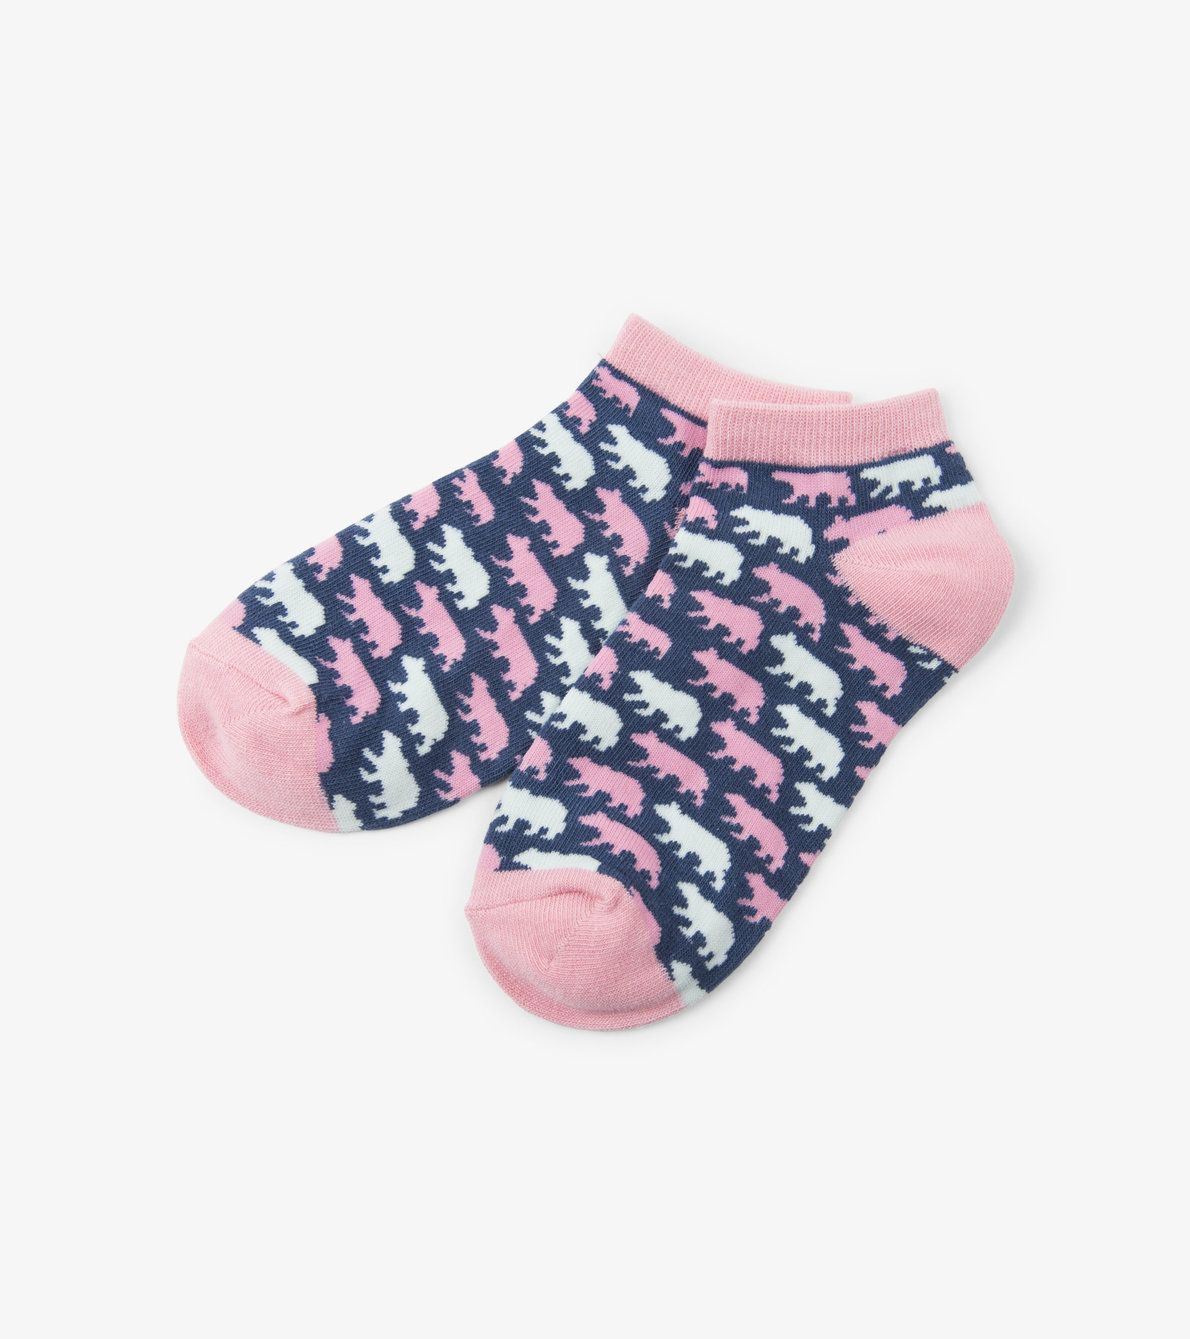 View larger image of Cottage Bears Women's Ankle Socks